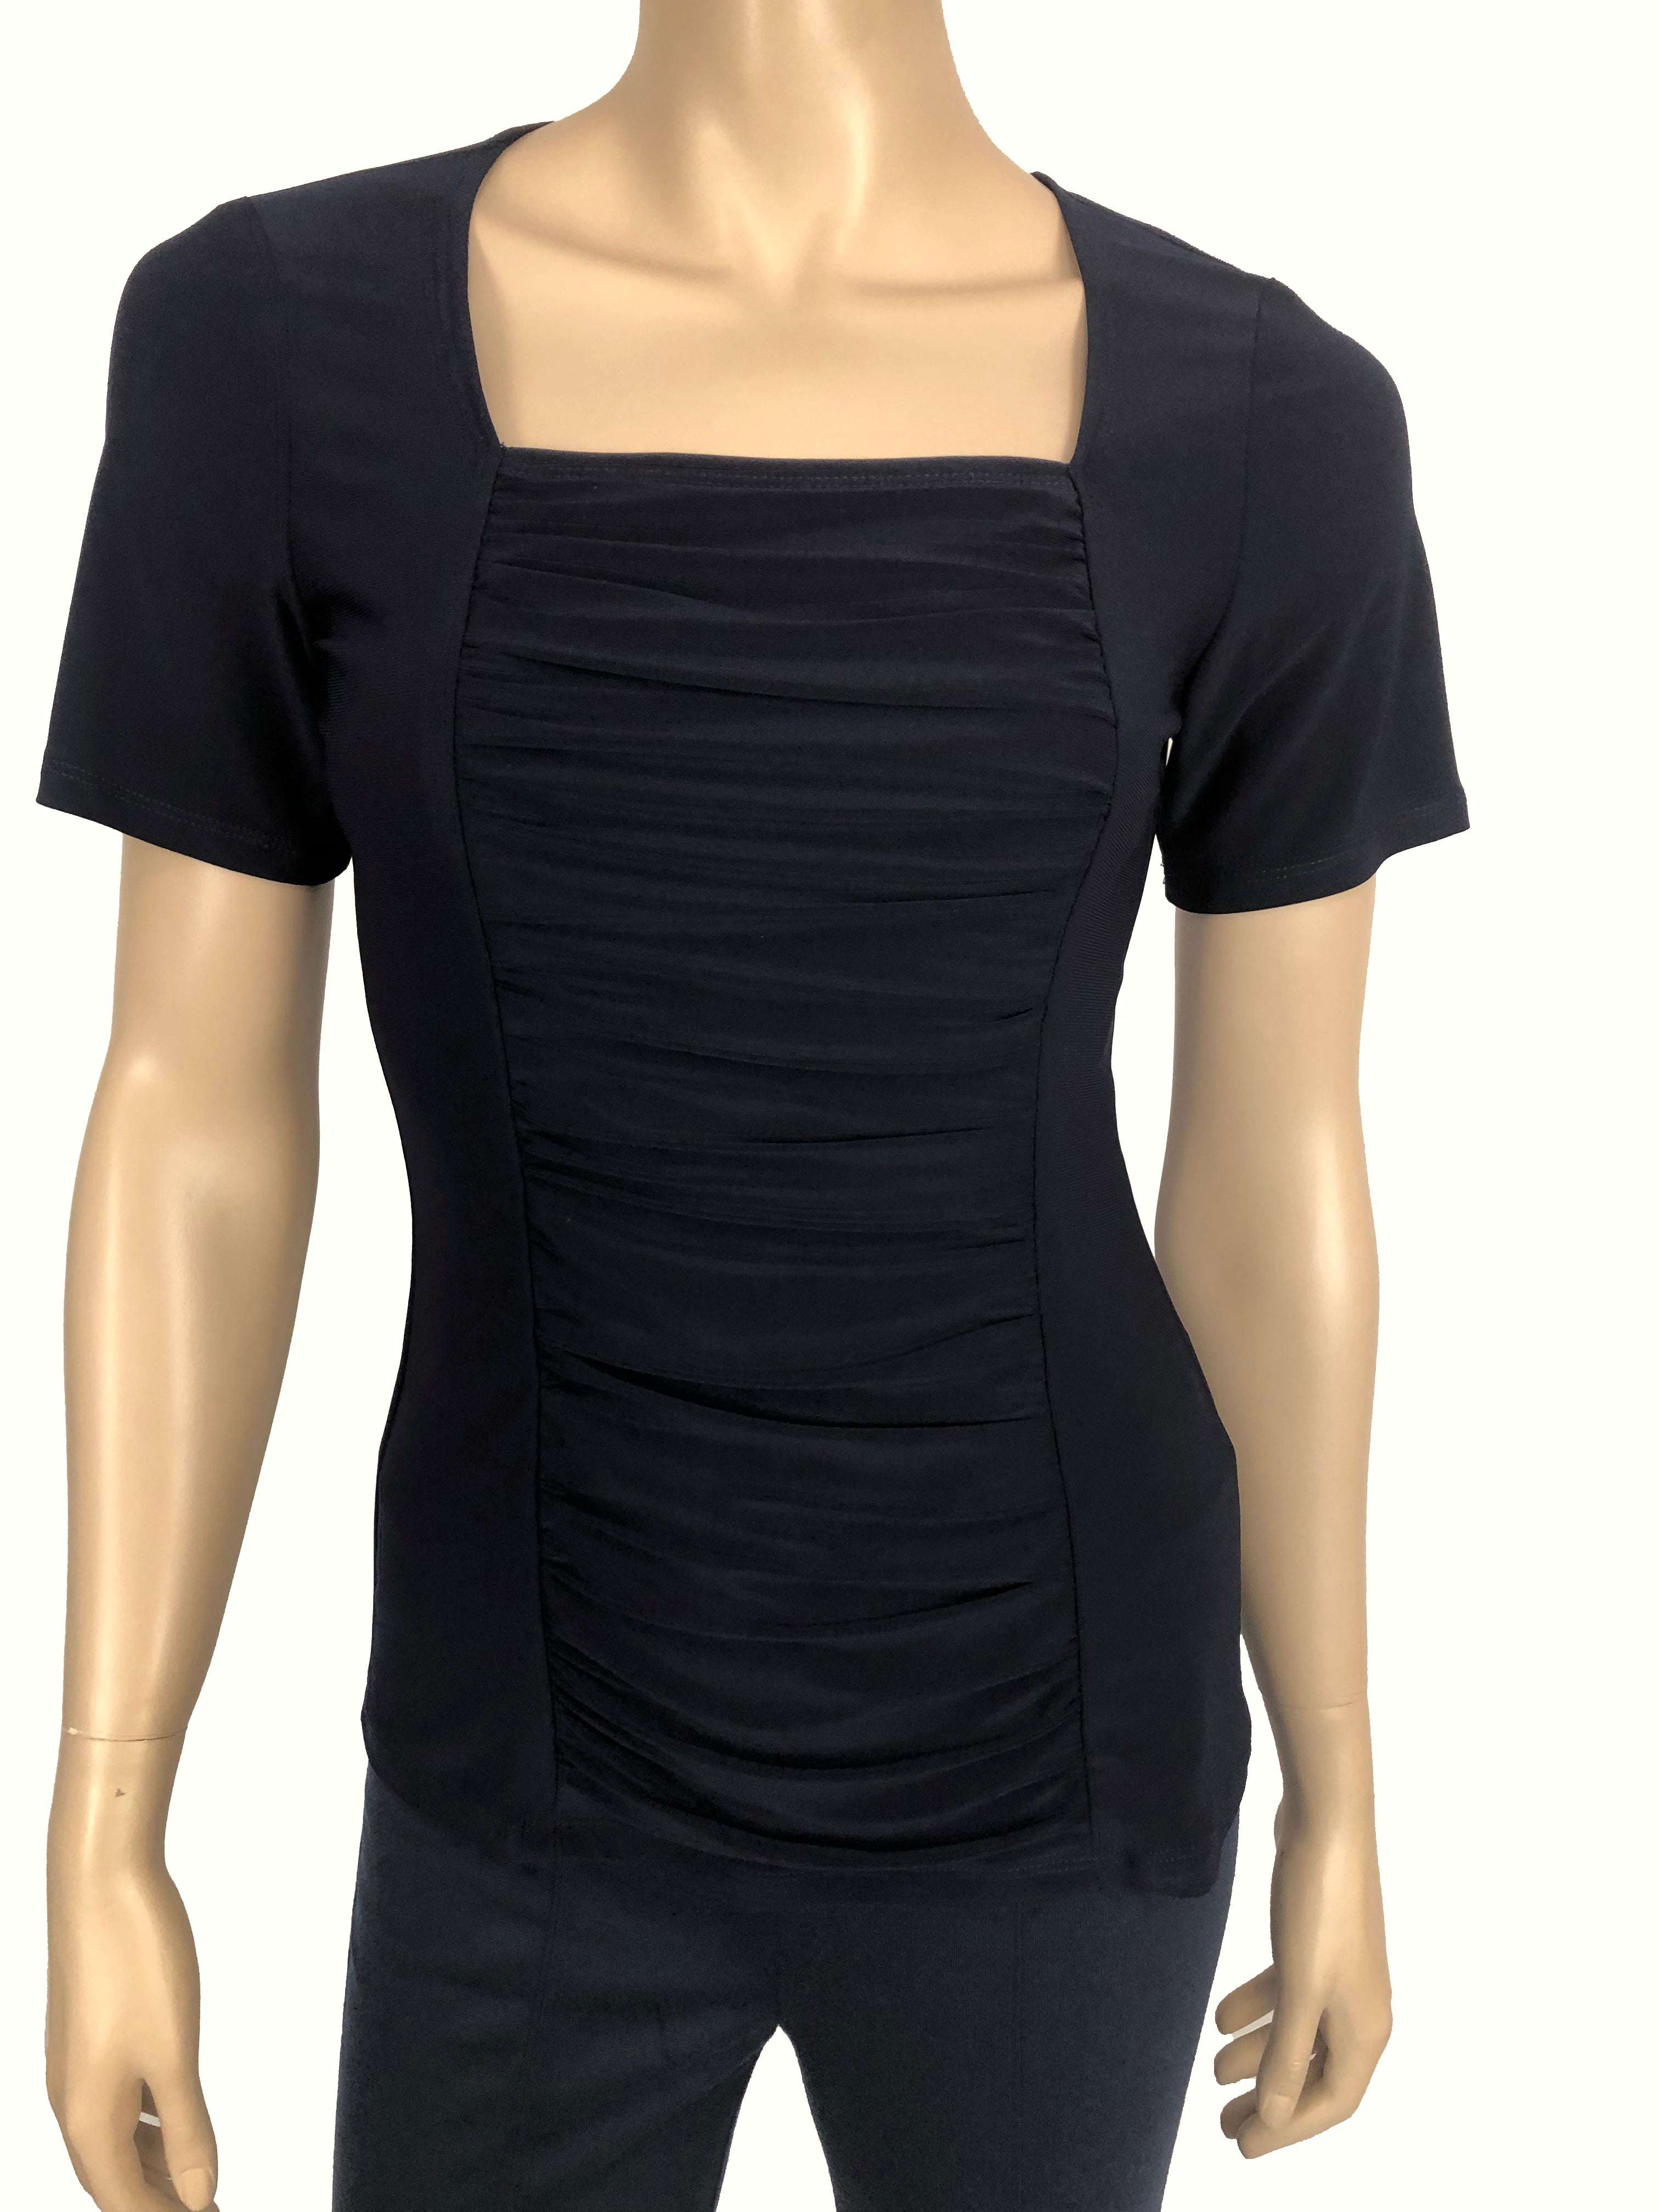 Women's Tops Navy Top On Sale Flattering Fit Quality Stretch Fabric Made in Canada Yvonne Marie Boutiques - Yvonne Marie - Yvonne Marie